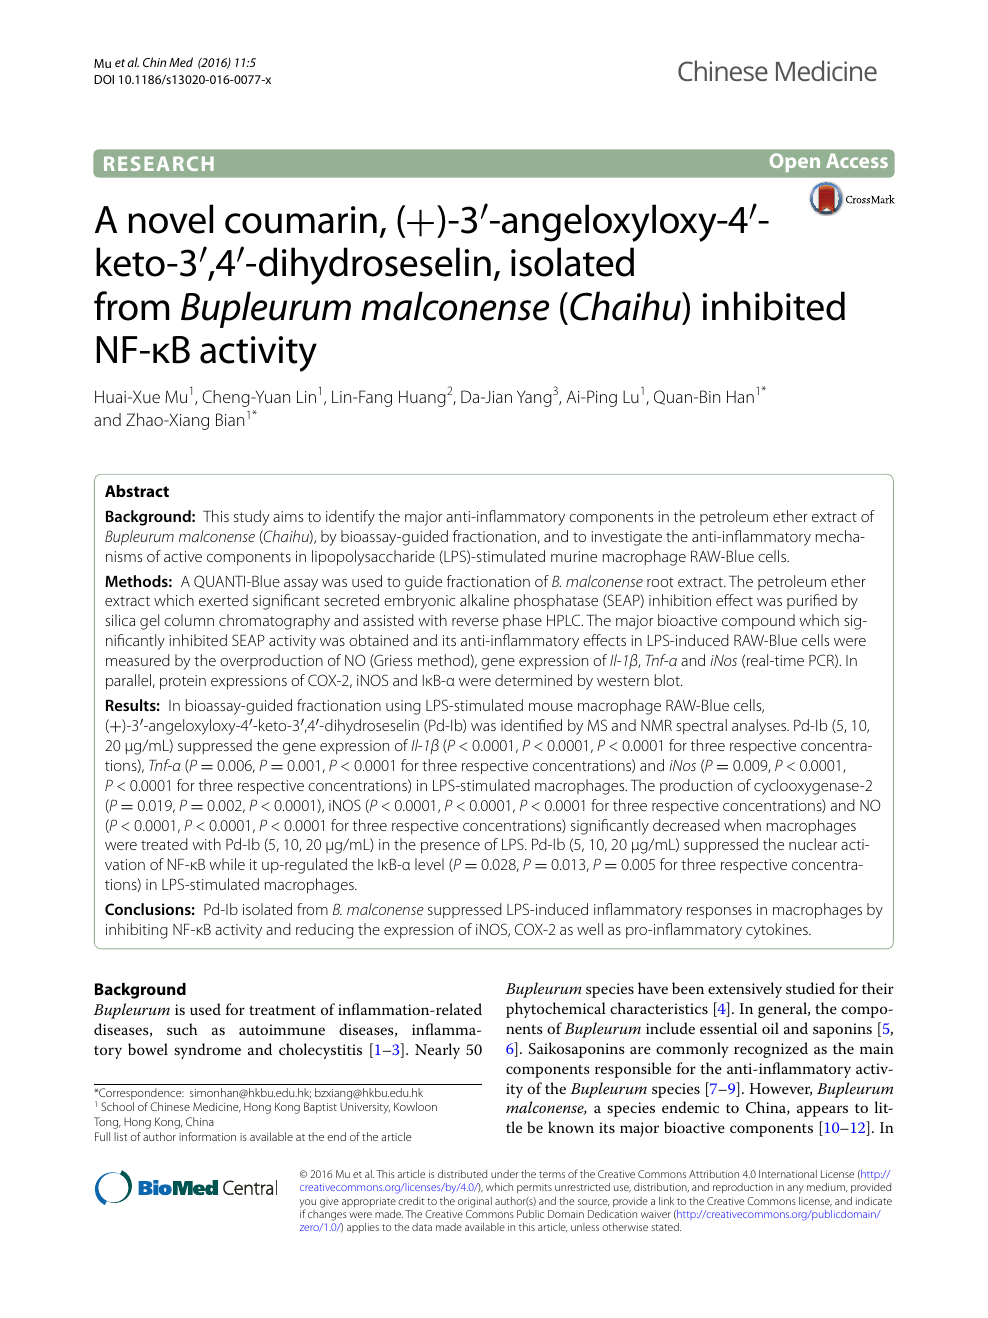 A Novel Coumarin 3 Angeloxyloxy 4 Keto 3 4 Dihydroseselin Isolated From Bupleurum Malconense Chaihu Inhibited Nf Kb Activity Topic Of Research Paper In Biological Sciences Download Scholarly Article Pdf And Read For Free On Cyberleninka